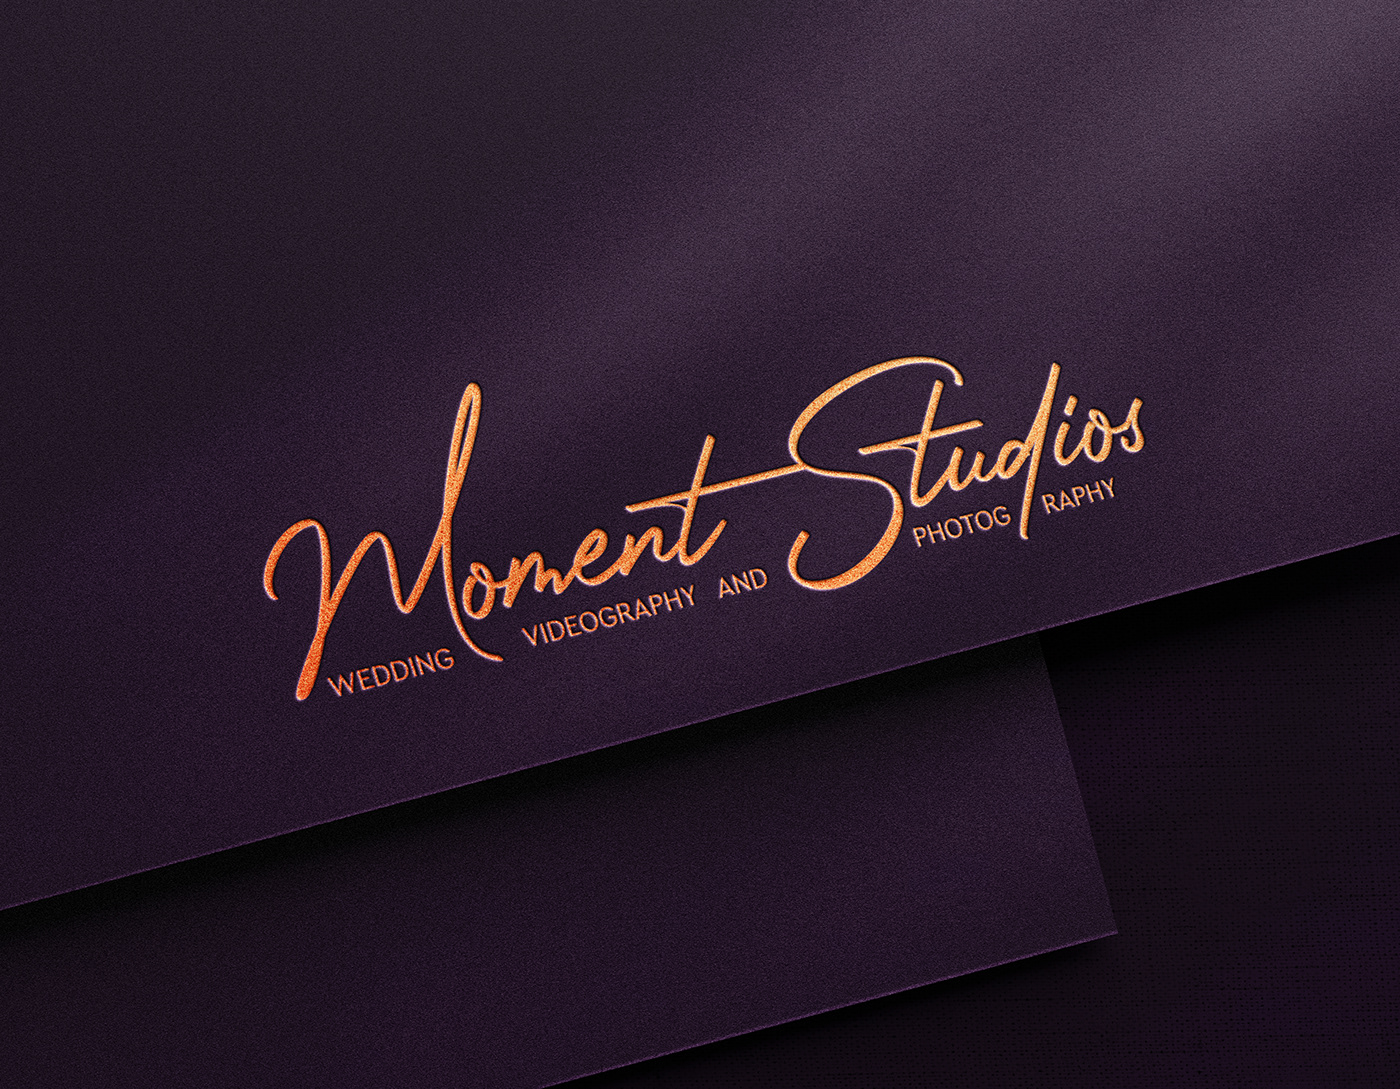 Moment Studios (Wedding  Videography And Photography) Signature Logo

#signature #signatureline